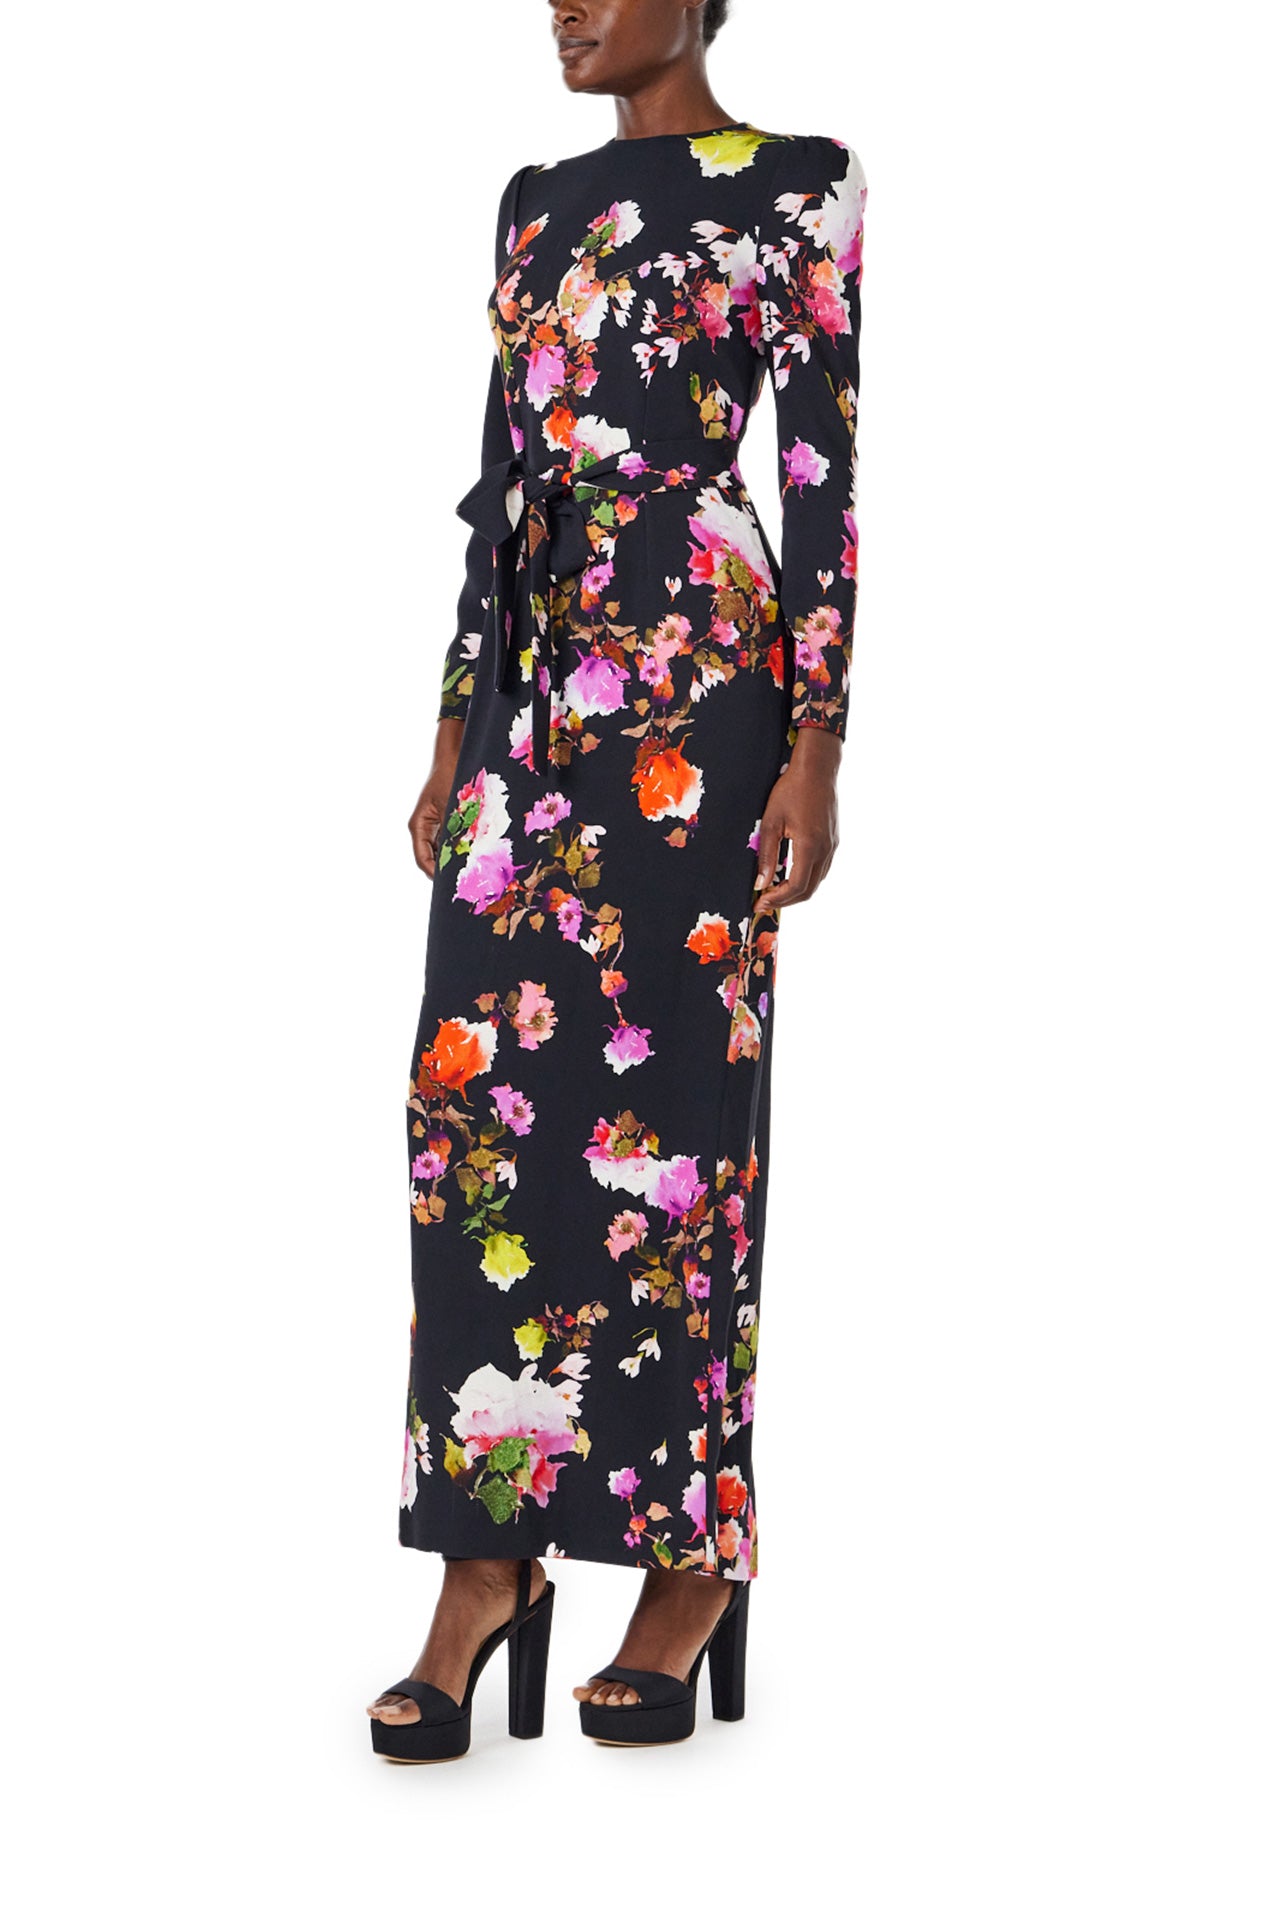 Monique Lhuillier Spring 2024 long sleeve, jewel neck floral print gown with self-tie belt at waist. - left side.